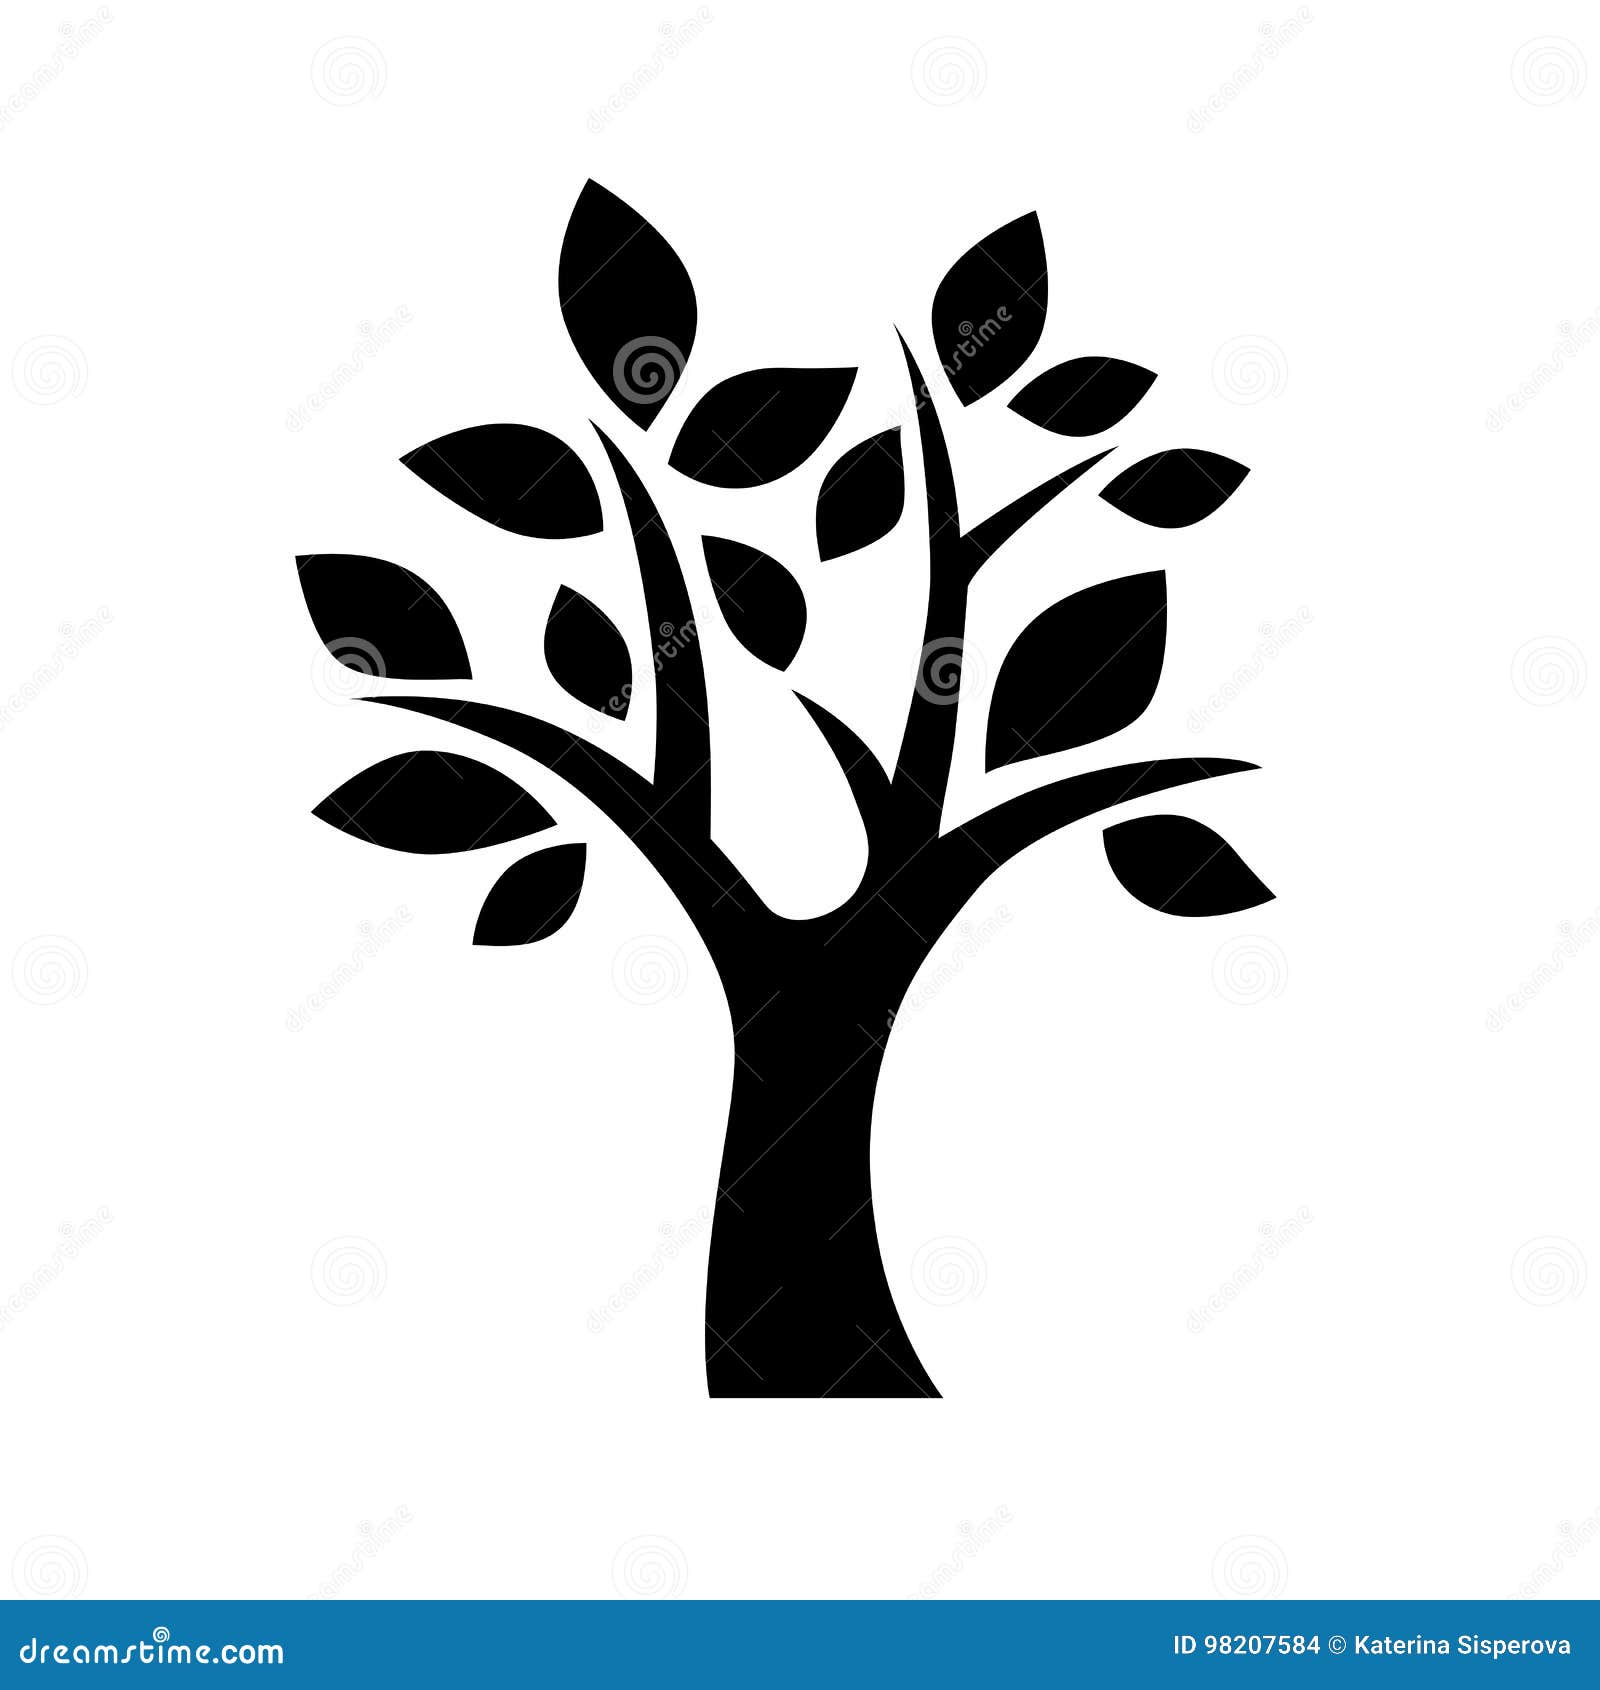 Stencil Tree Silhouette Decorative Simple Tree Stock Vector (Royalty Free)  617378129